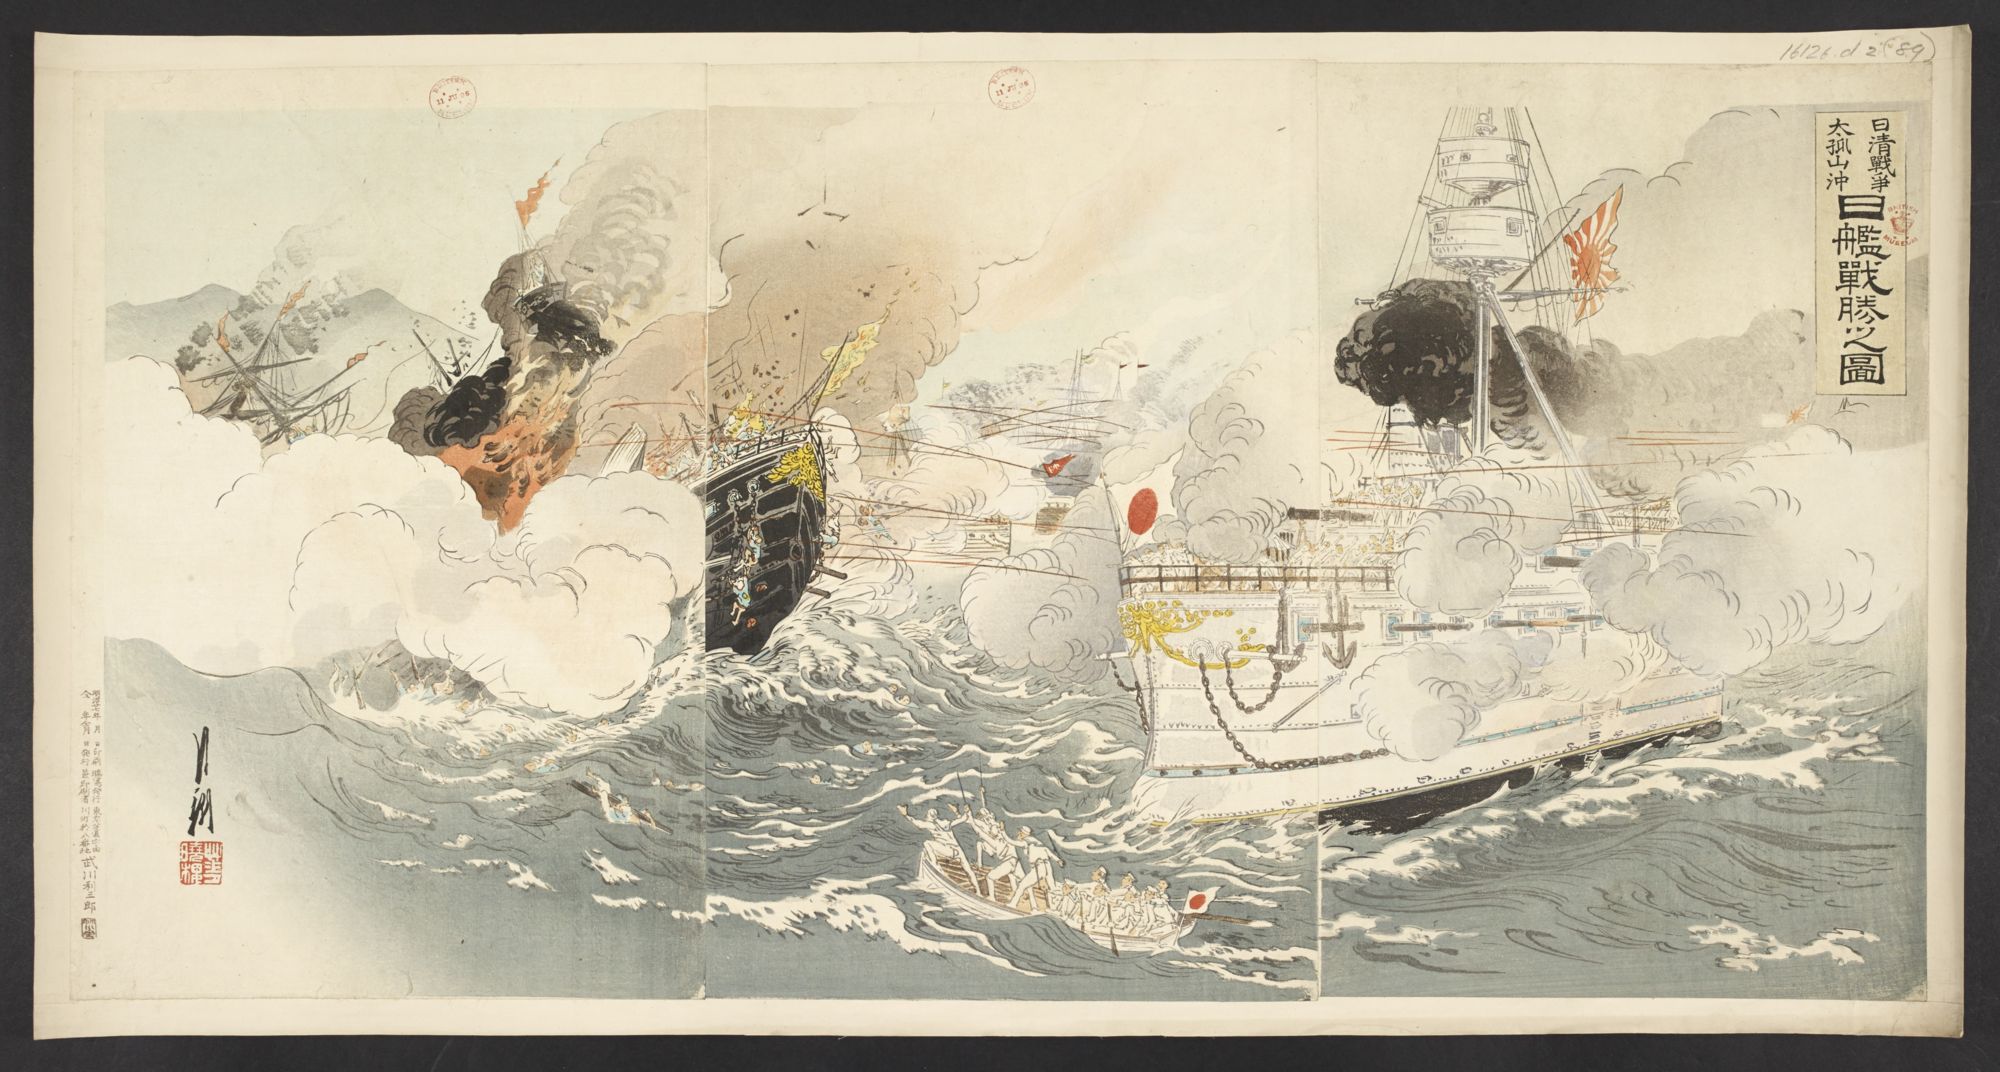 A Japanese warship is victorious in the battle off Dagushan during the Sino-Japanese War